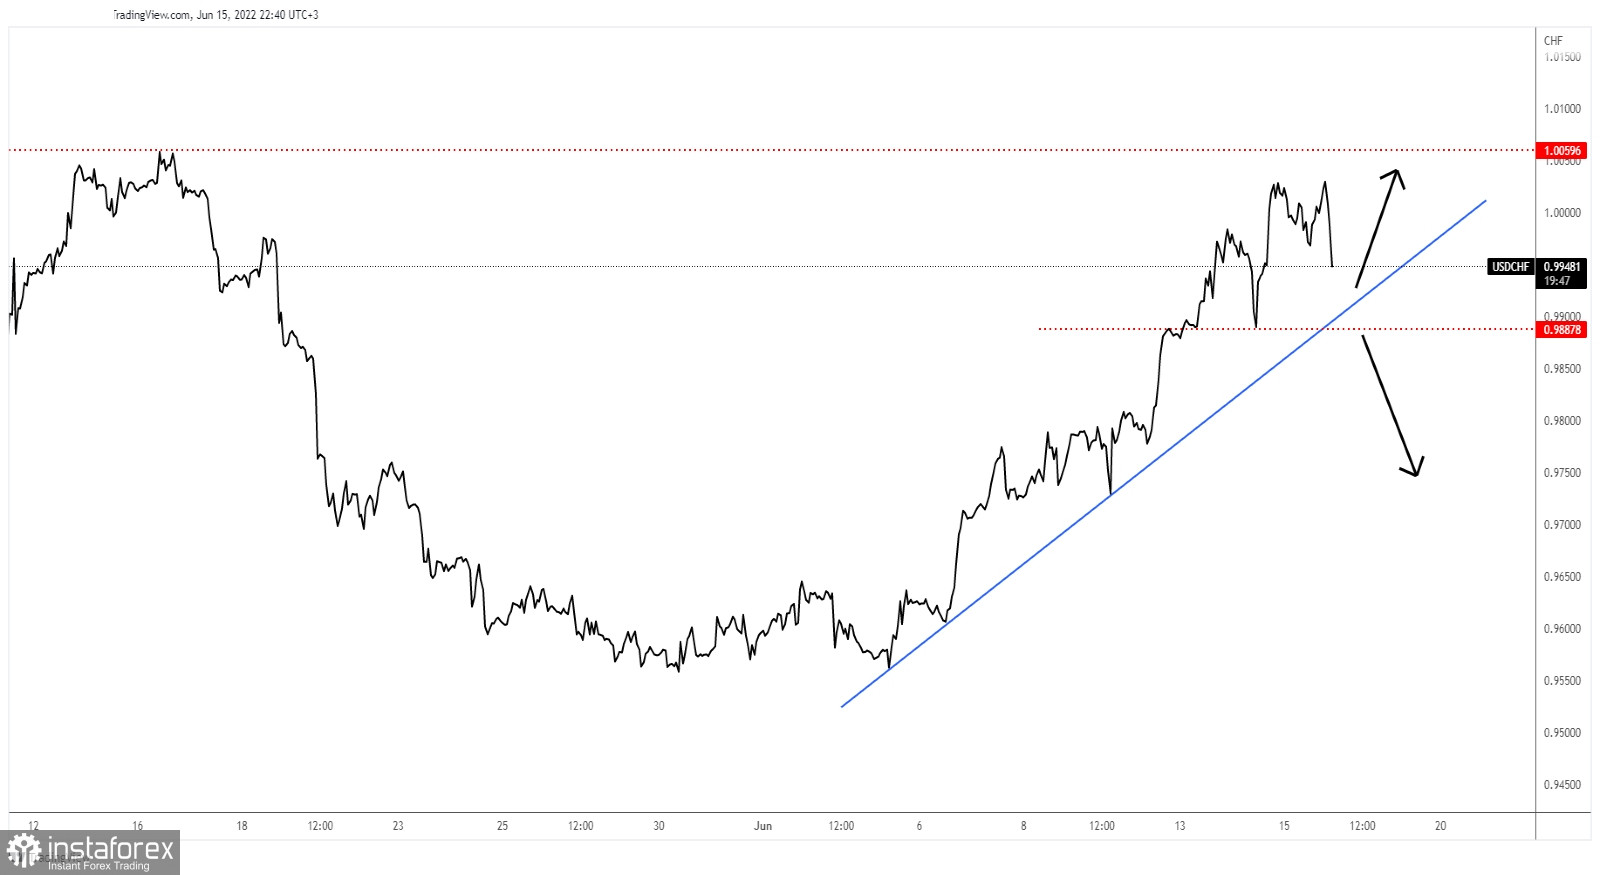 USD/CHF to resume uptrend 